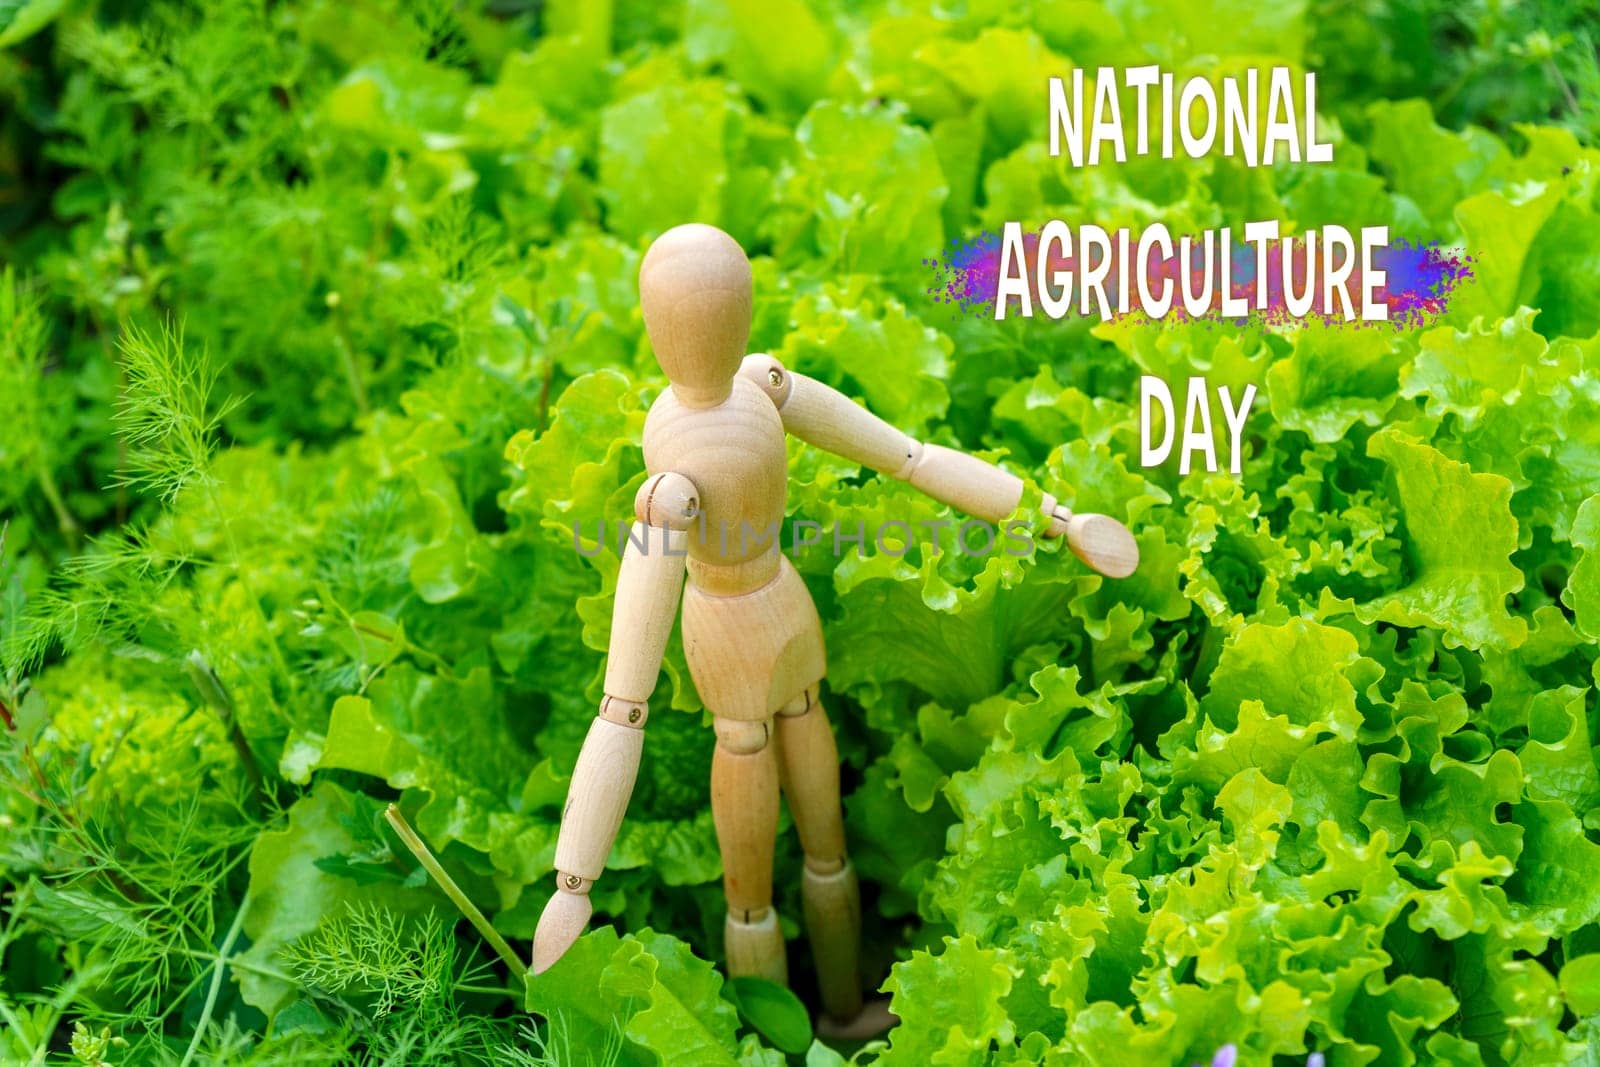 National Agriculture Day With a Wooden Mannequin Amongst Vibrant Lettuce Leaves by darksoul72